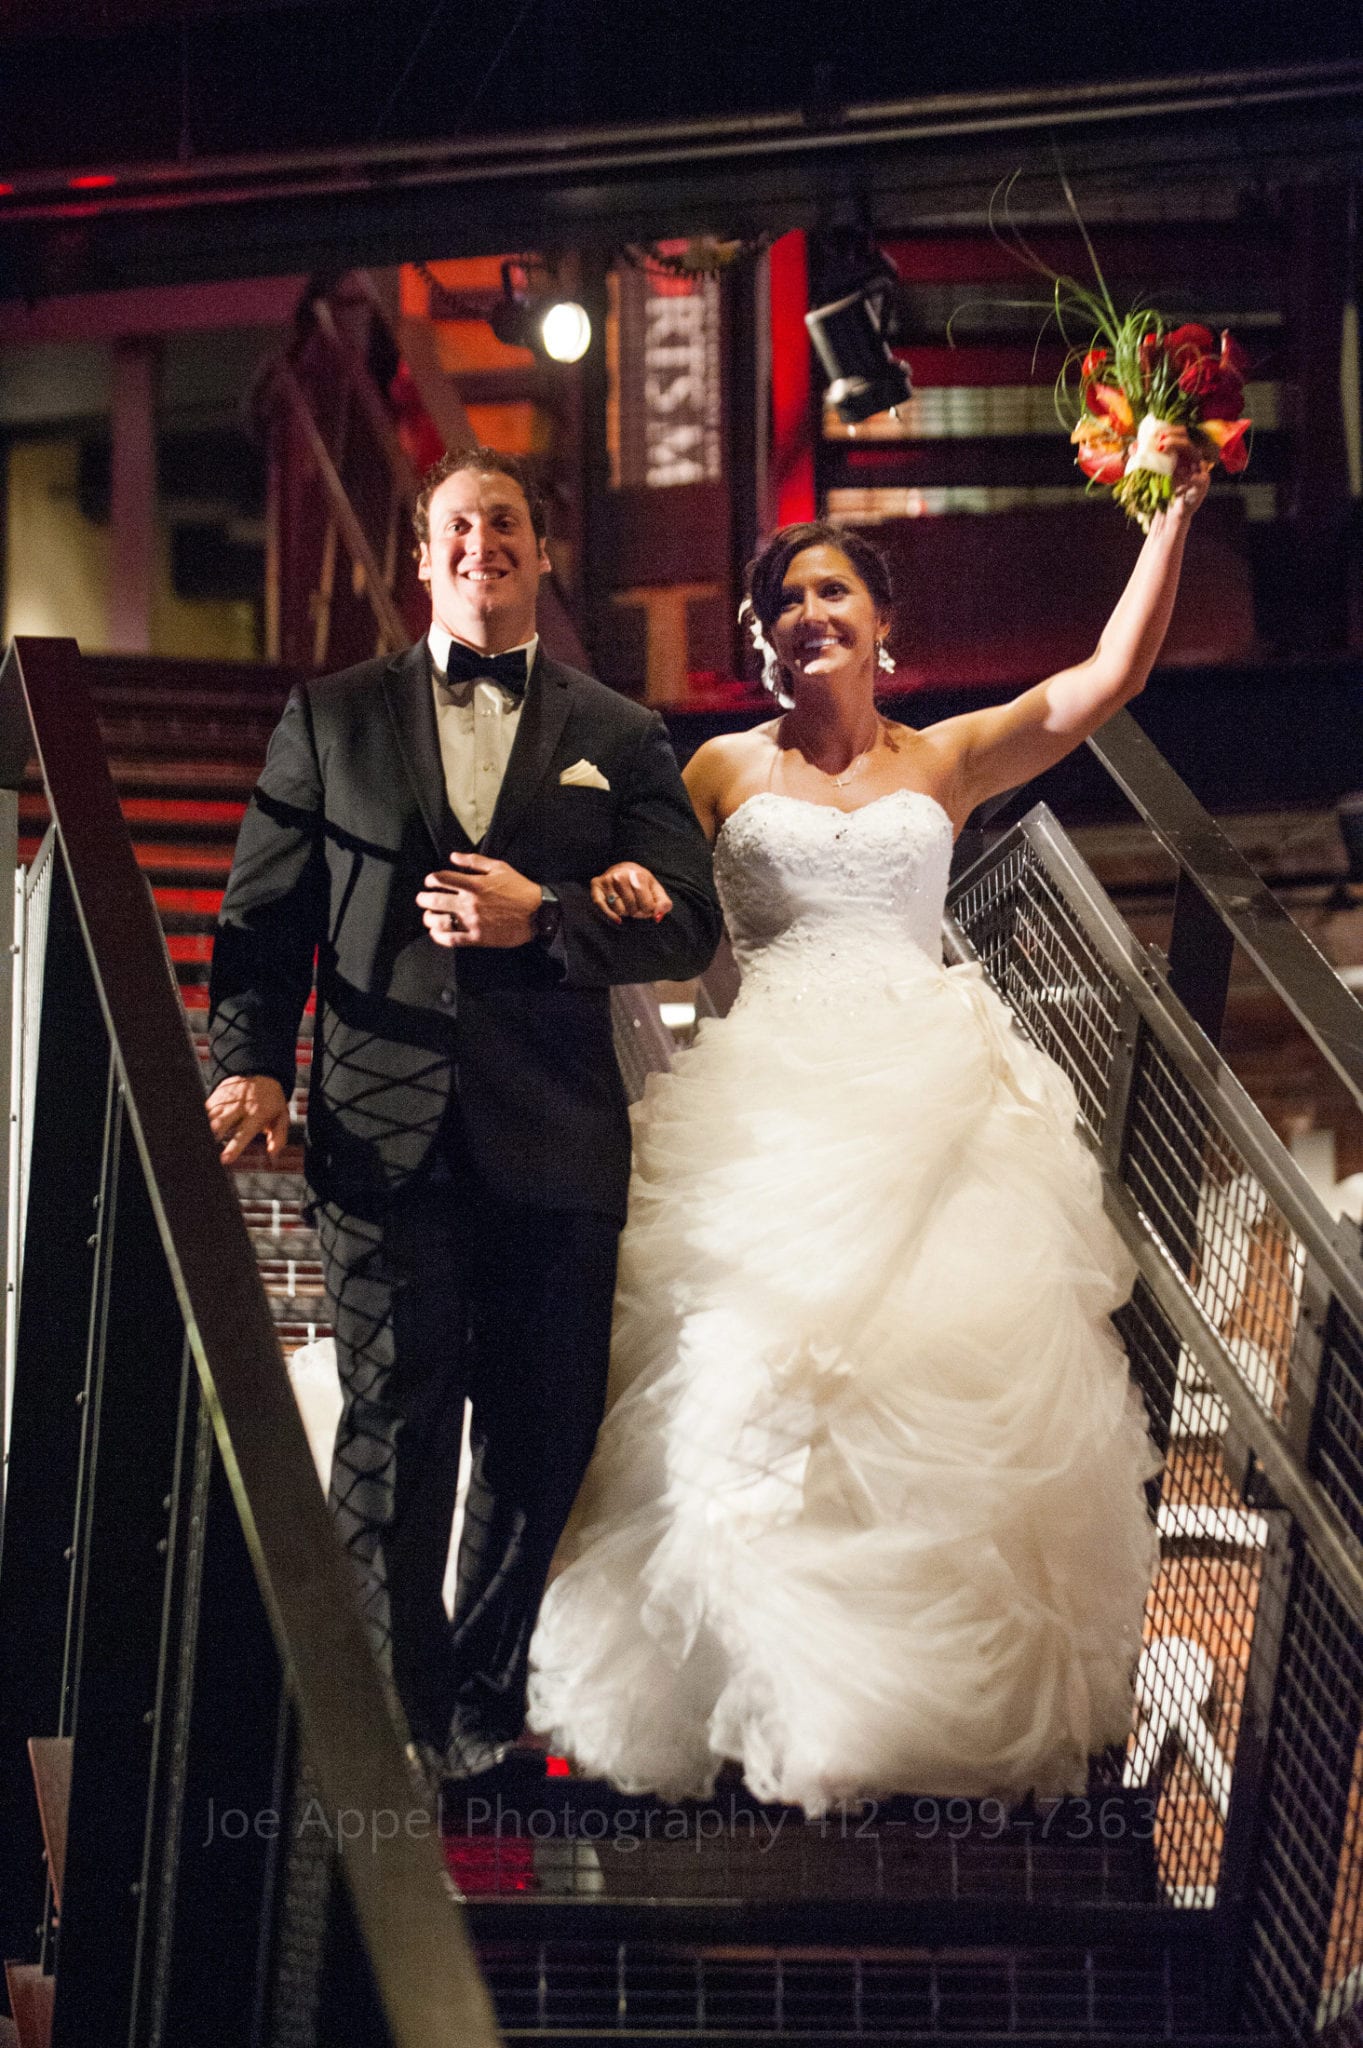 A bride and groom walk down the stairway - the bride in a puffy white dress, raising her bouquet - in the Great Hall at the Heinz History Center